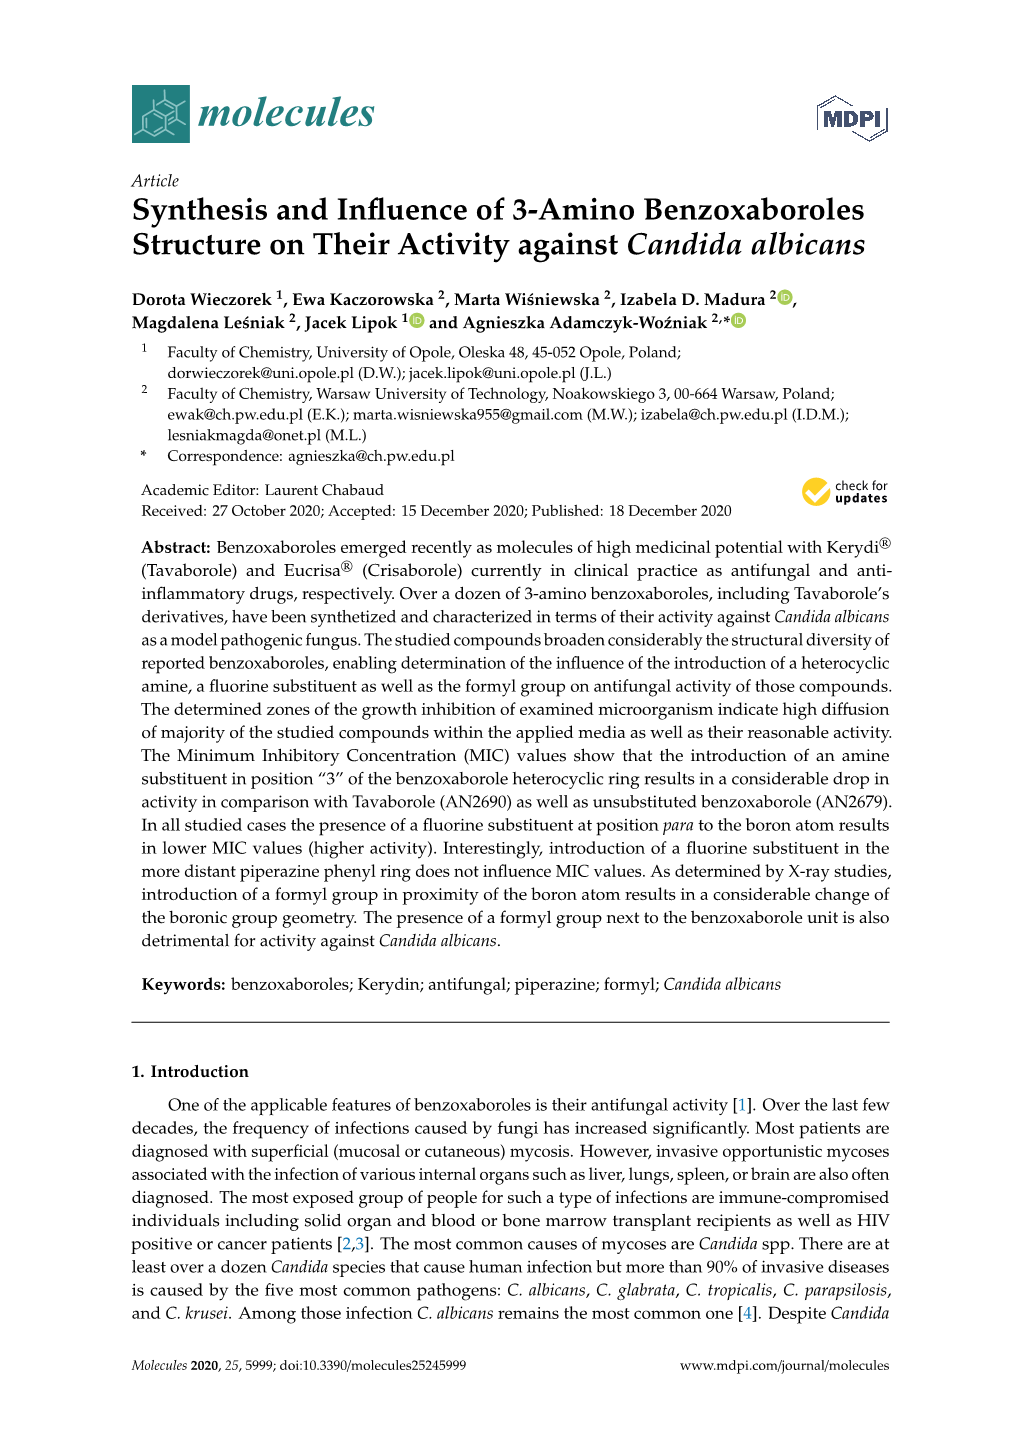 Synthesis and Influence of 3-Amino Benzoxaboroles Structure on Their Activity Against Candida Albicans